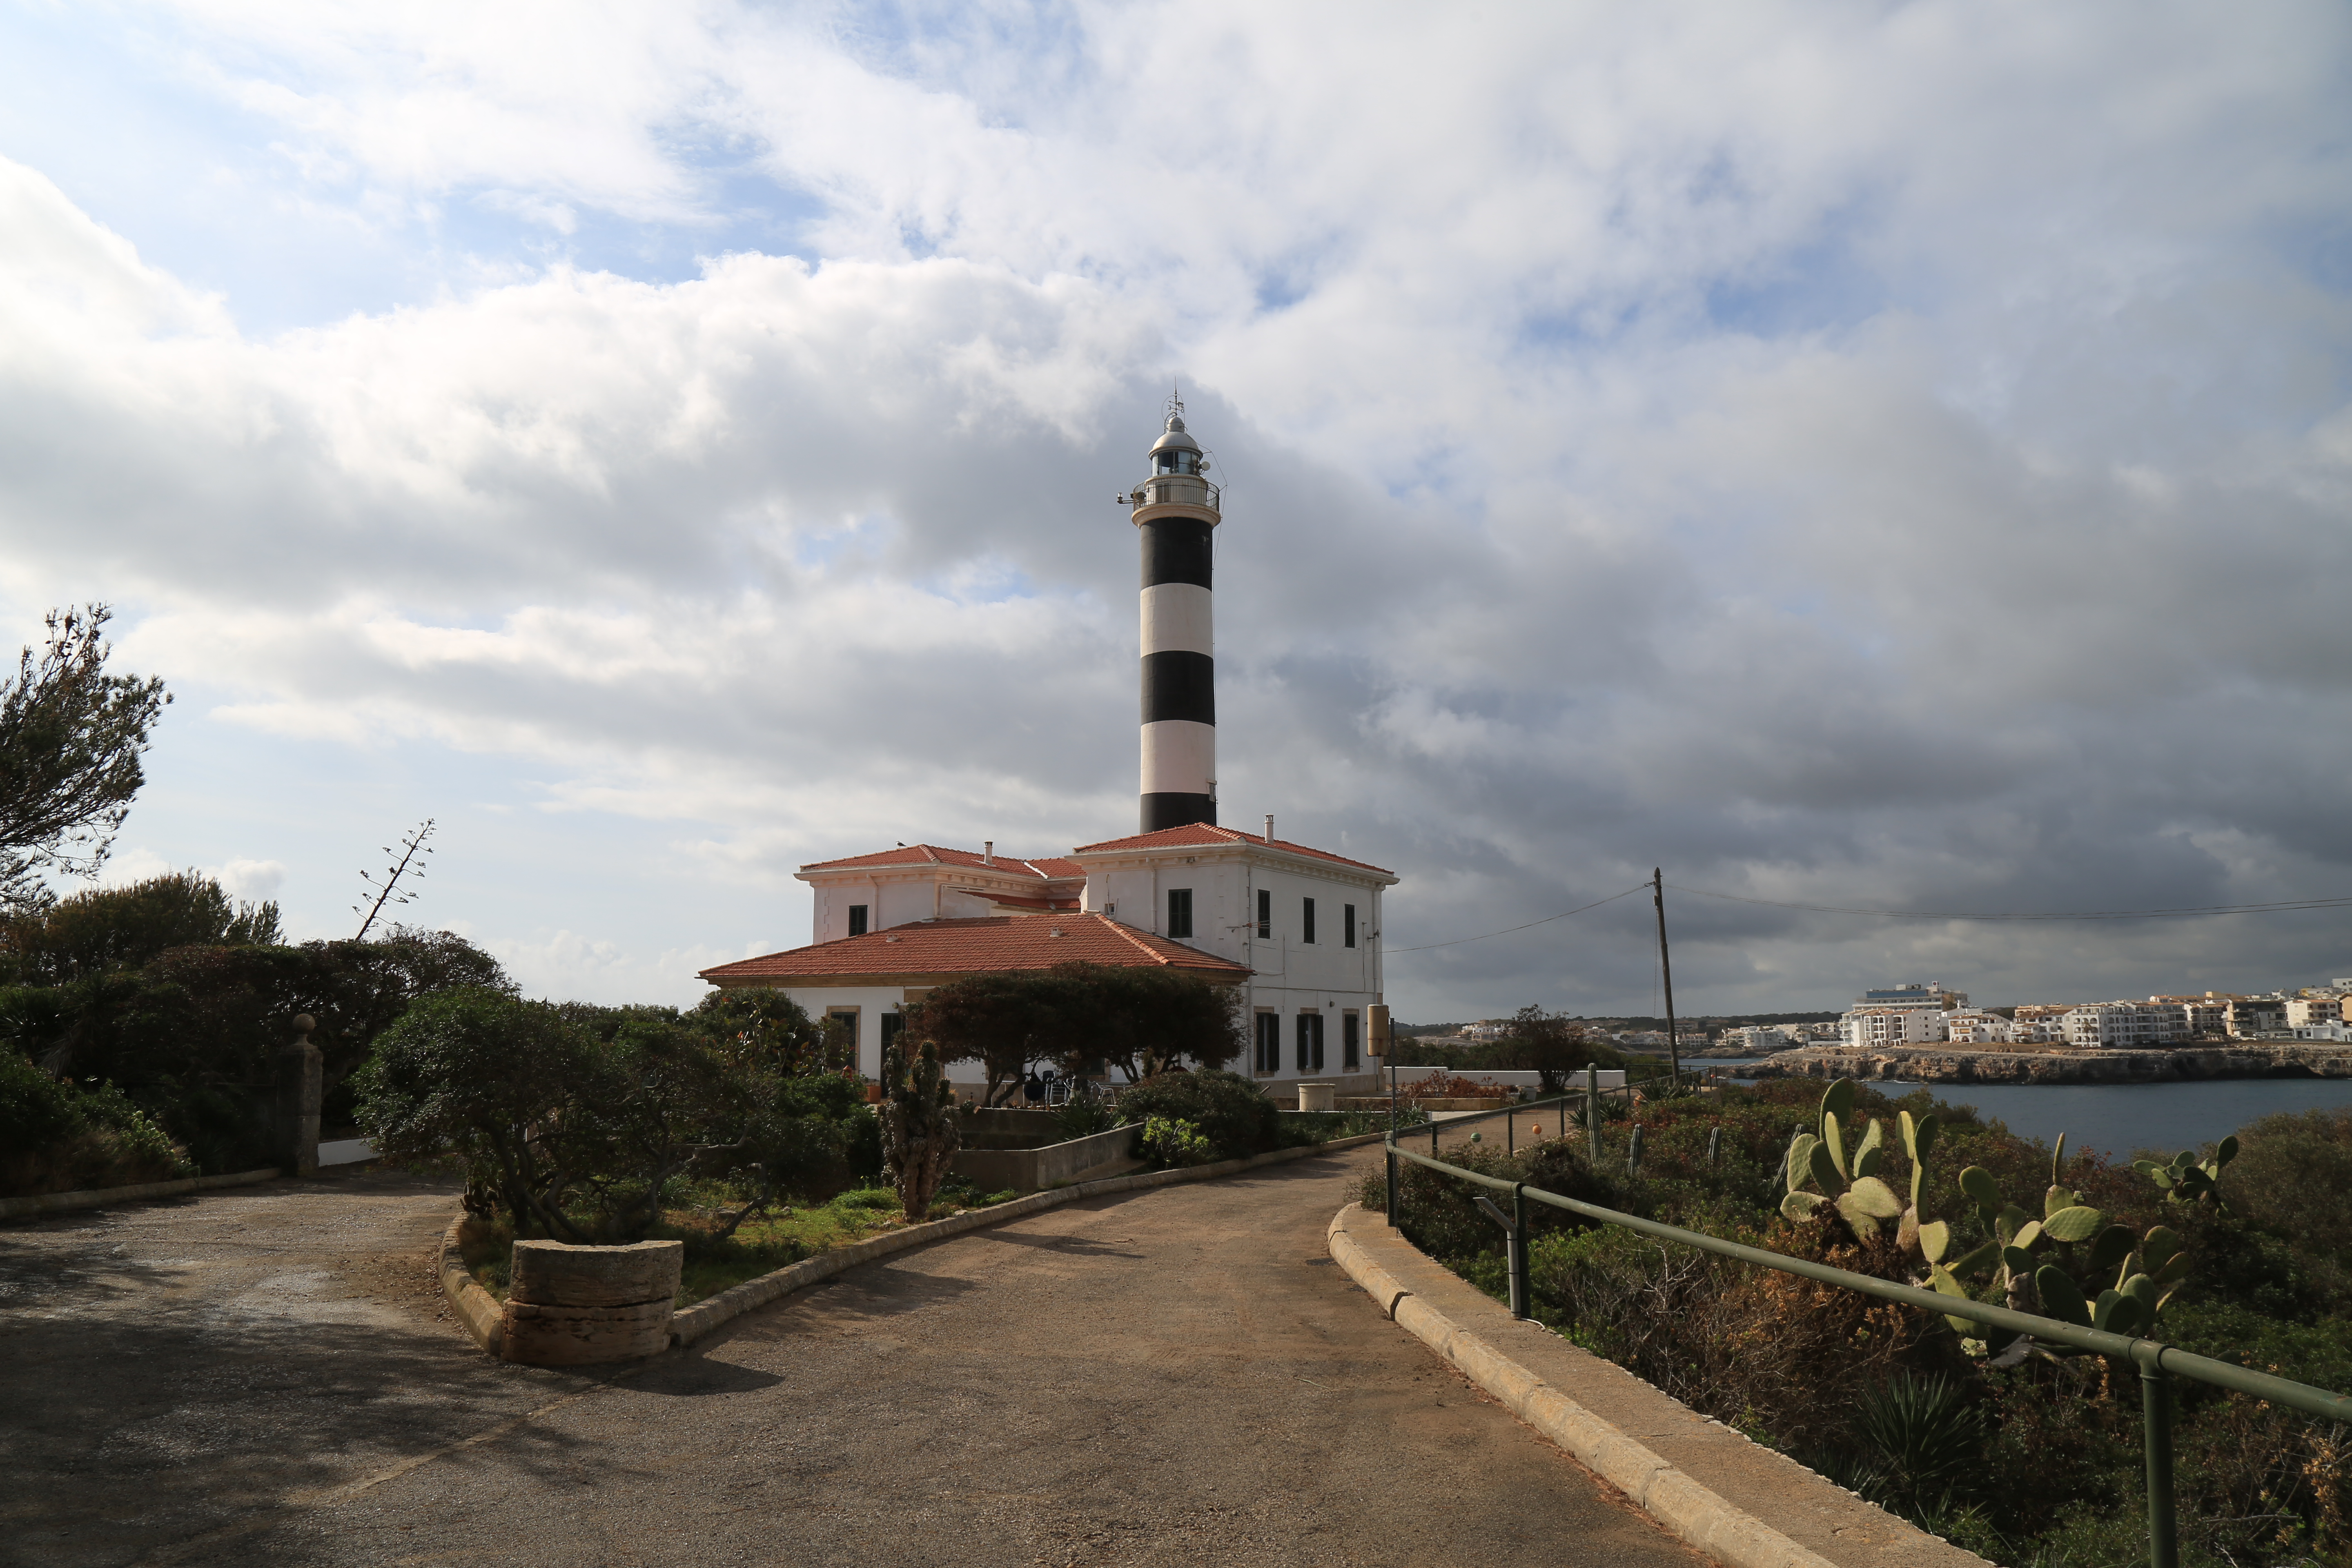 The Portocolom lighthouse will become part of the Balearic Islands Research Station Network